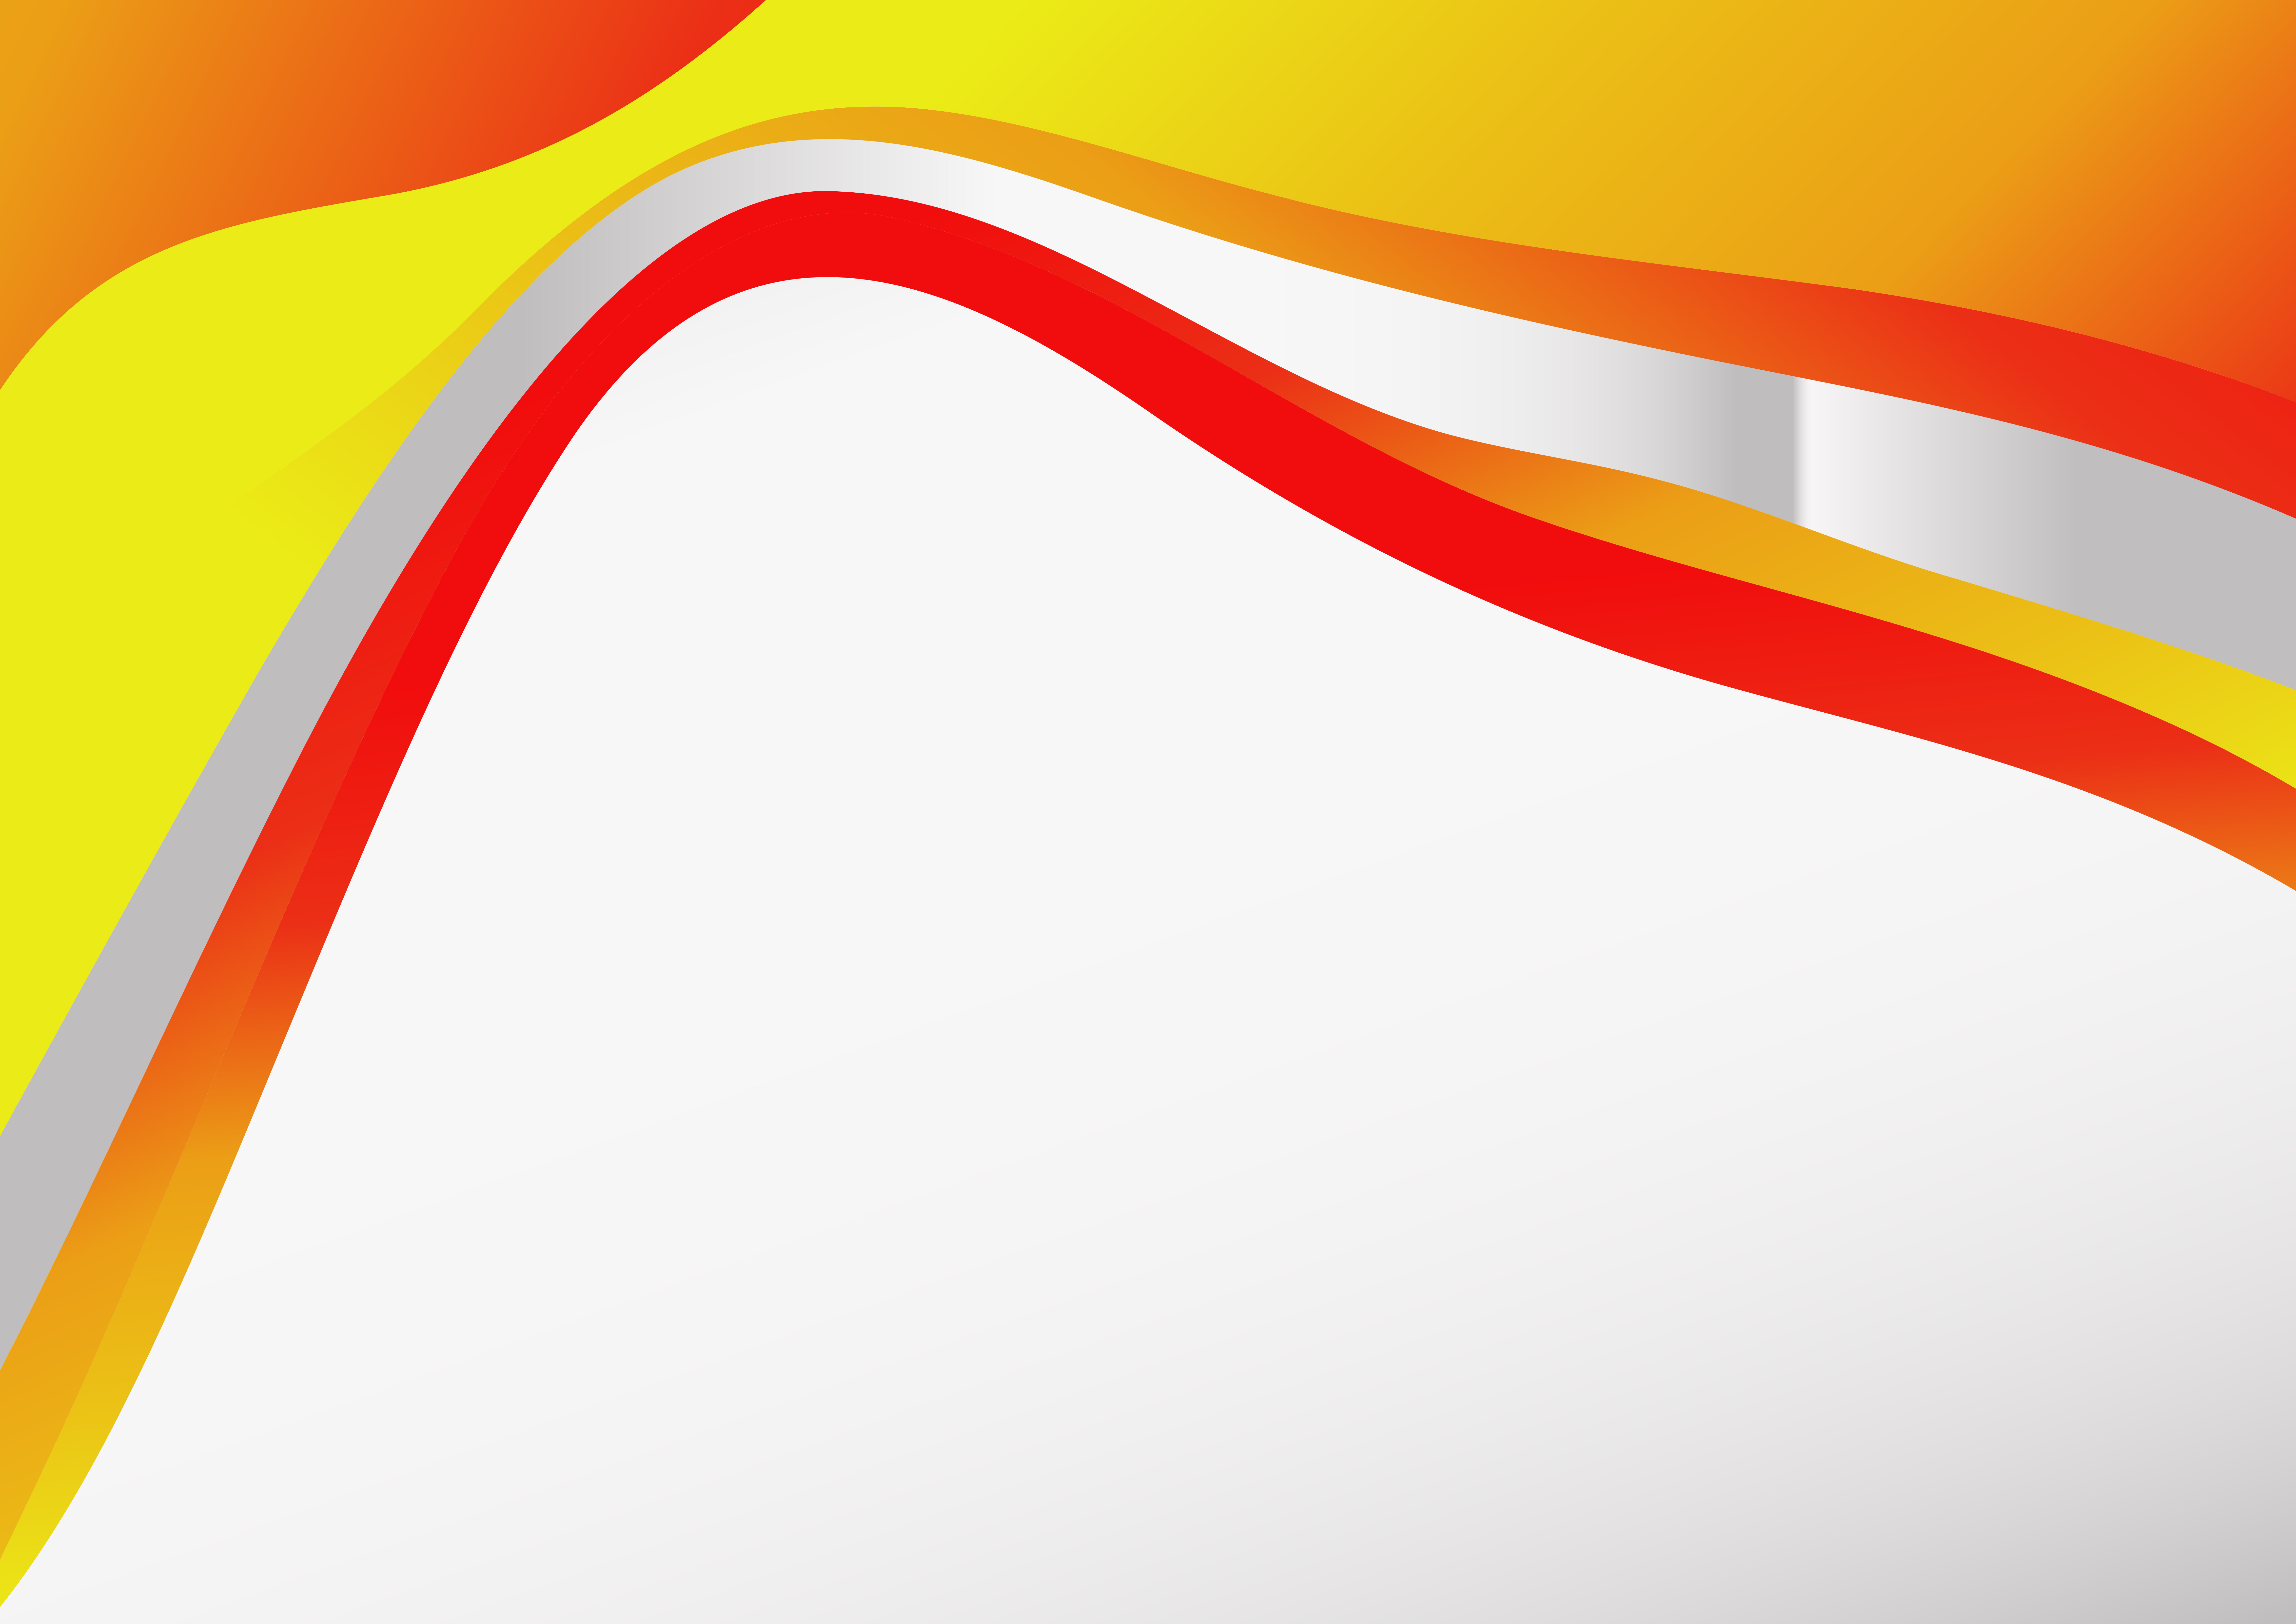 Free Red and Yellow Wave Background with Space for Your Text Vector Image